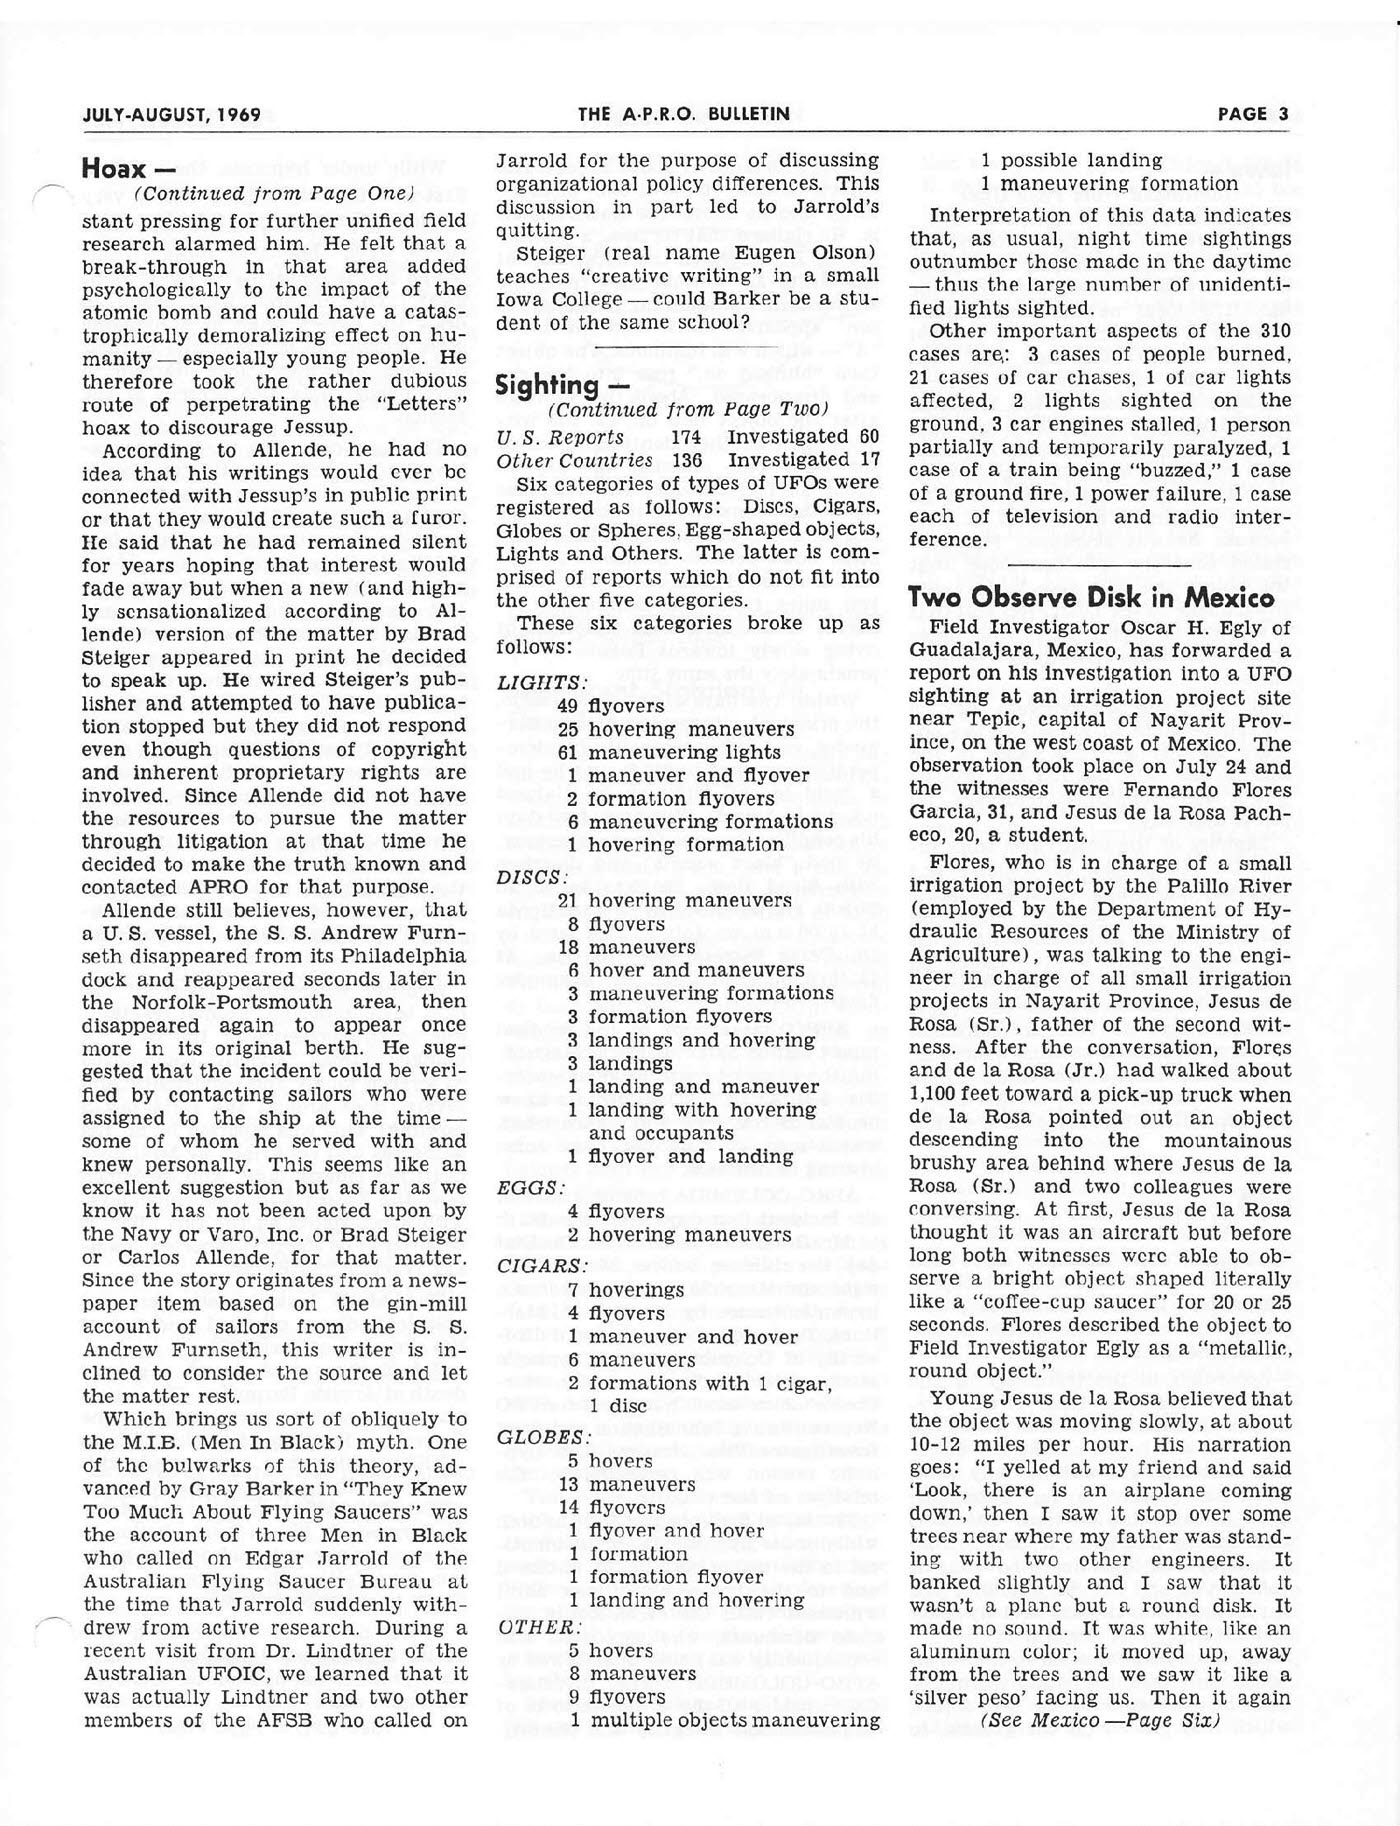 A.P.R.O. Bulletin - July-August, 1969-Page 3